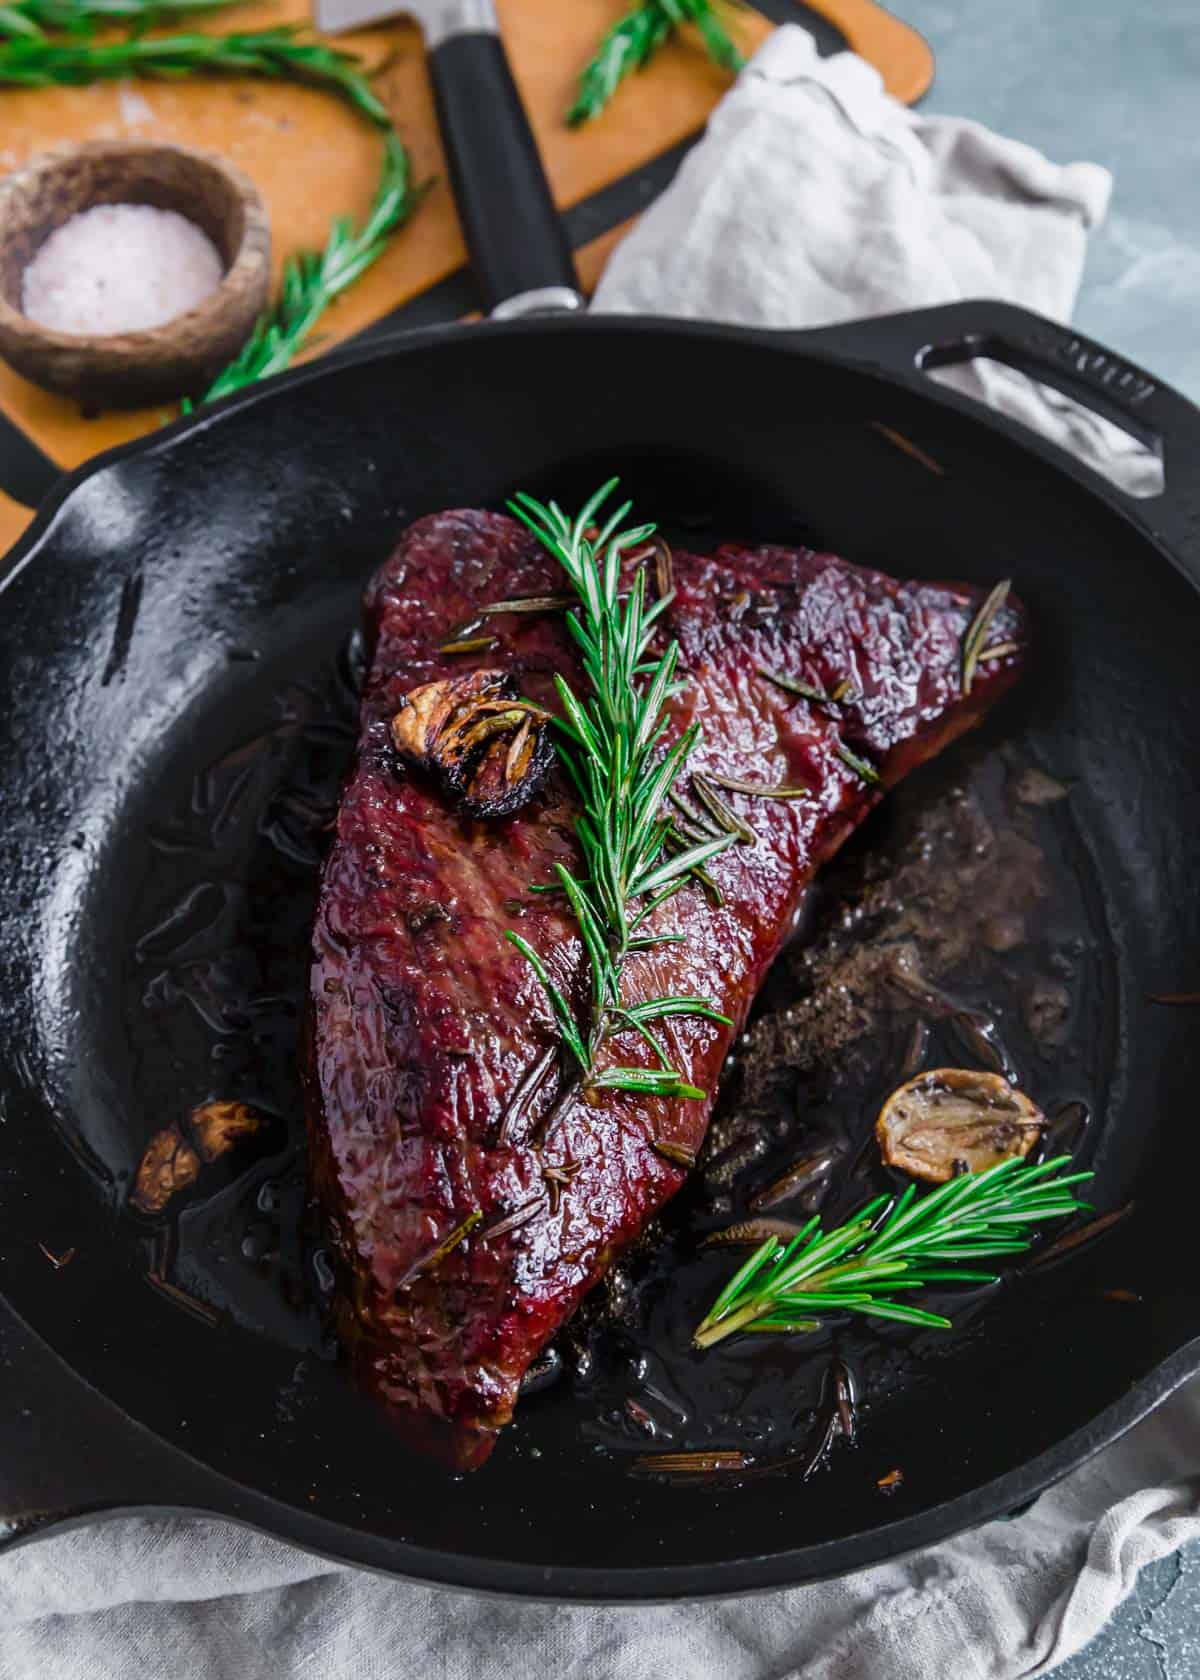 Reverse sear tri tip in a cast iron skillet with fresh rosemary and garlic cloves.